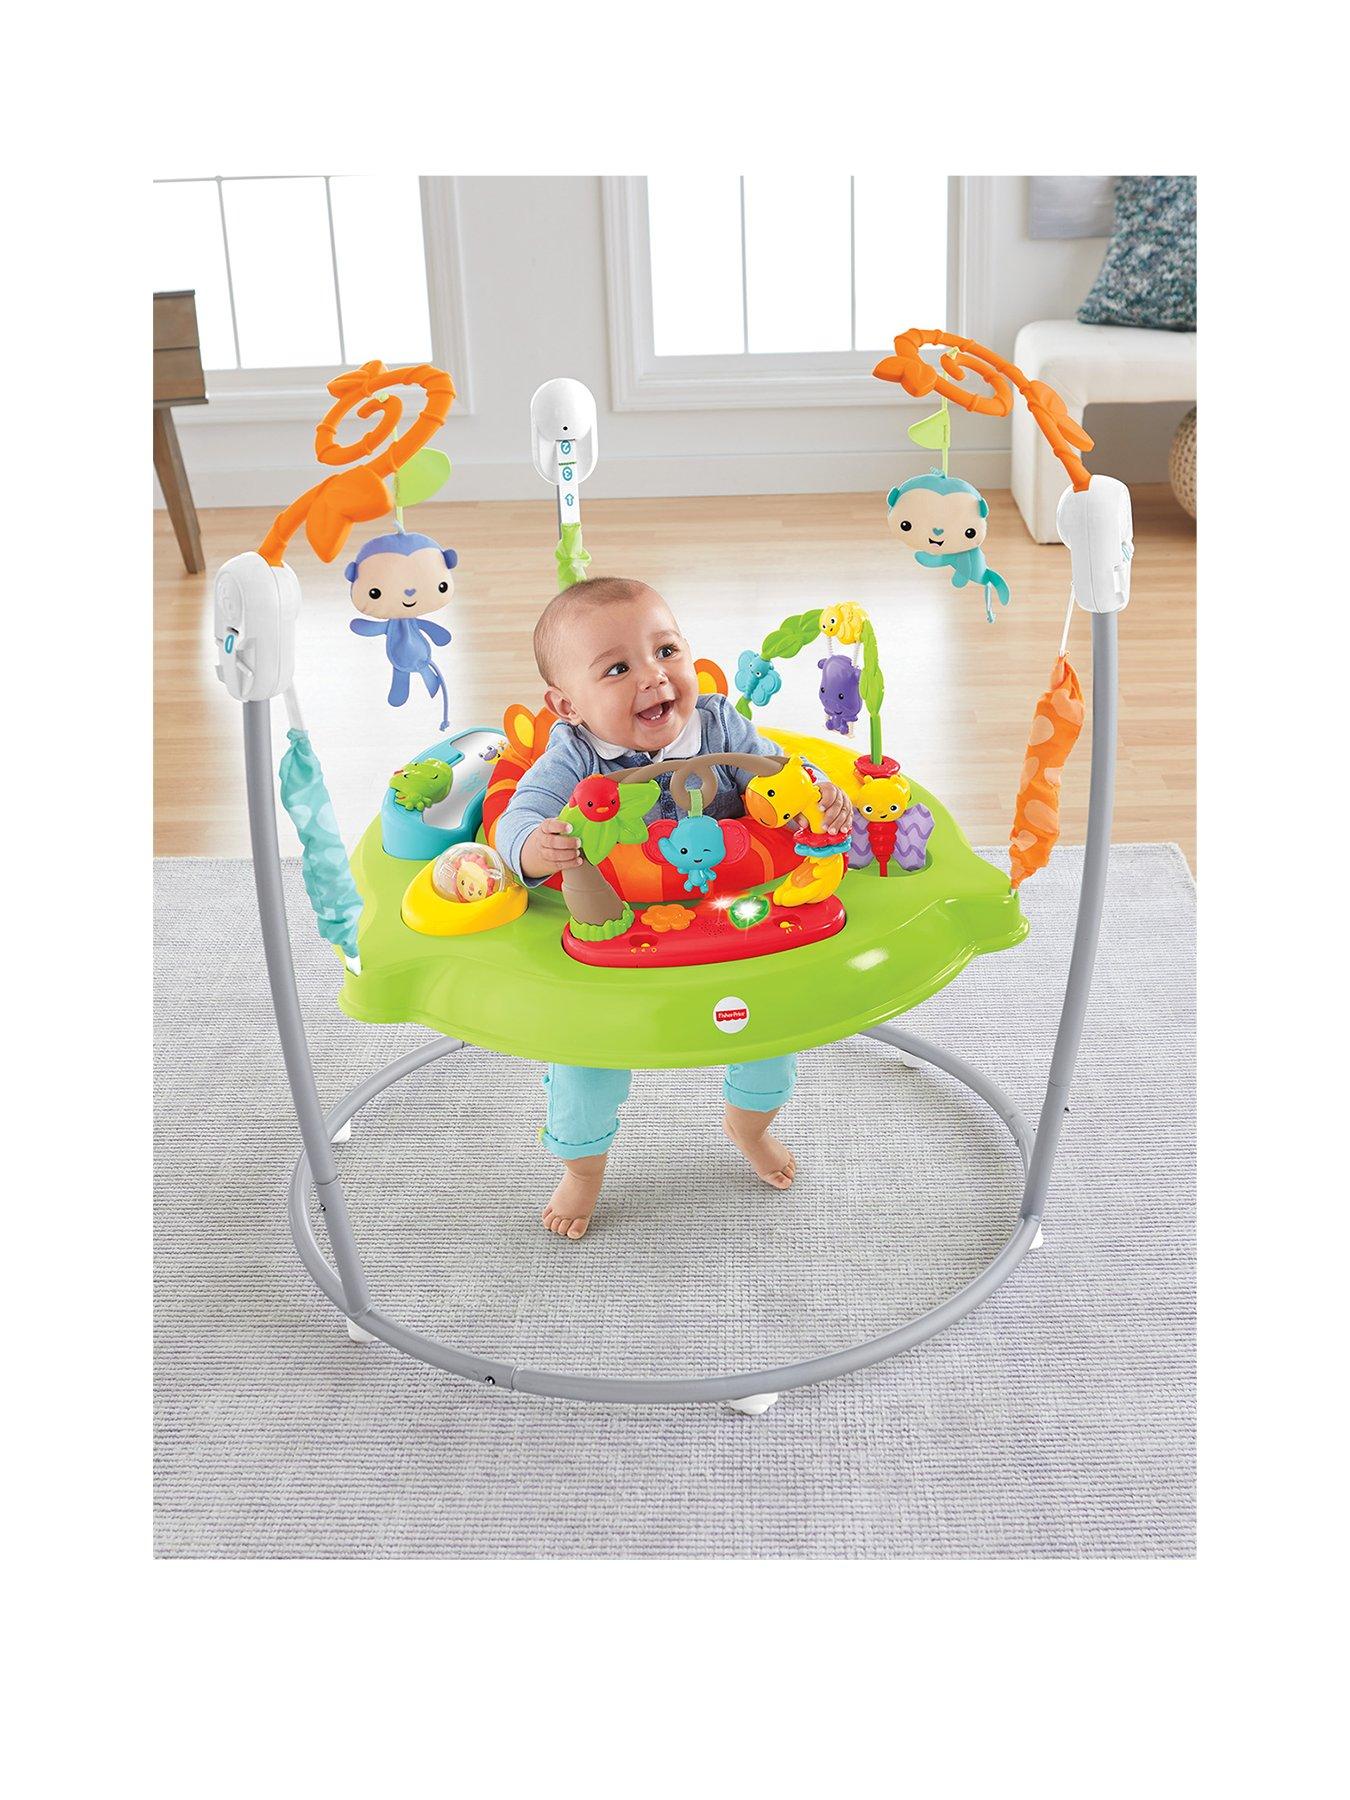 baby jumperoo fisher price